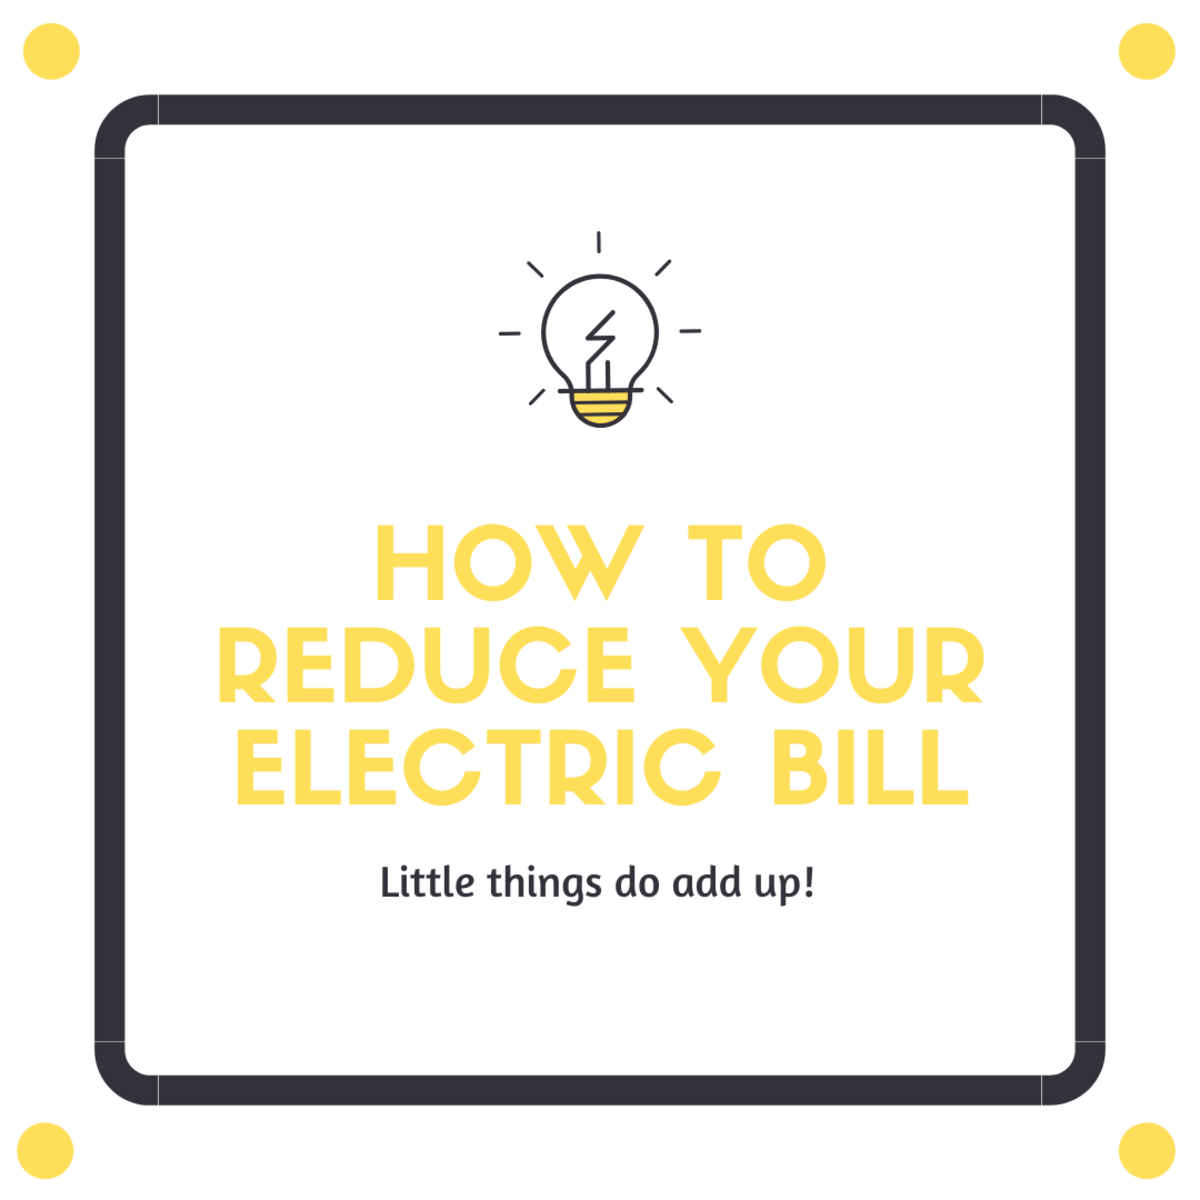 19 Ways to Reduce Your Electric Bill Without Spending a Dime